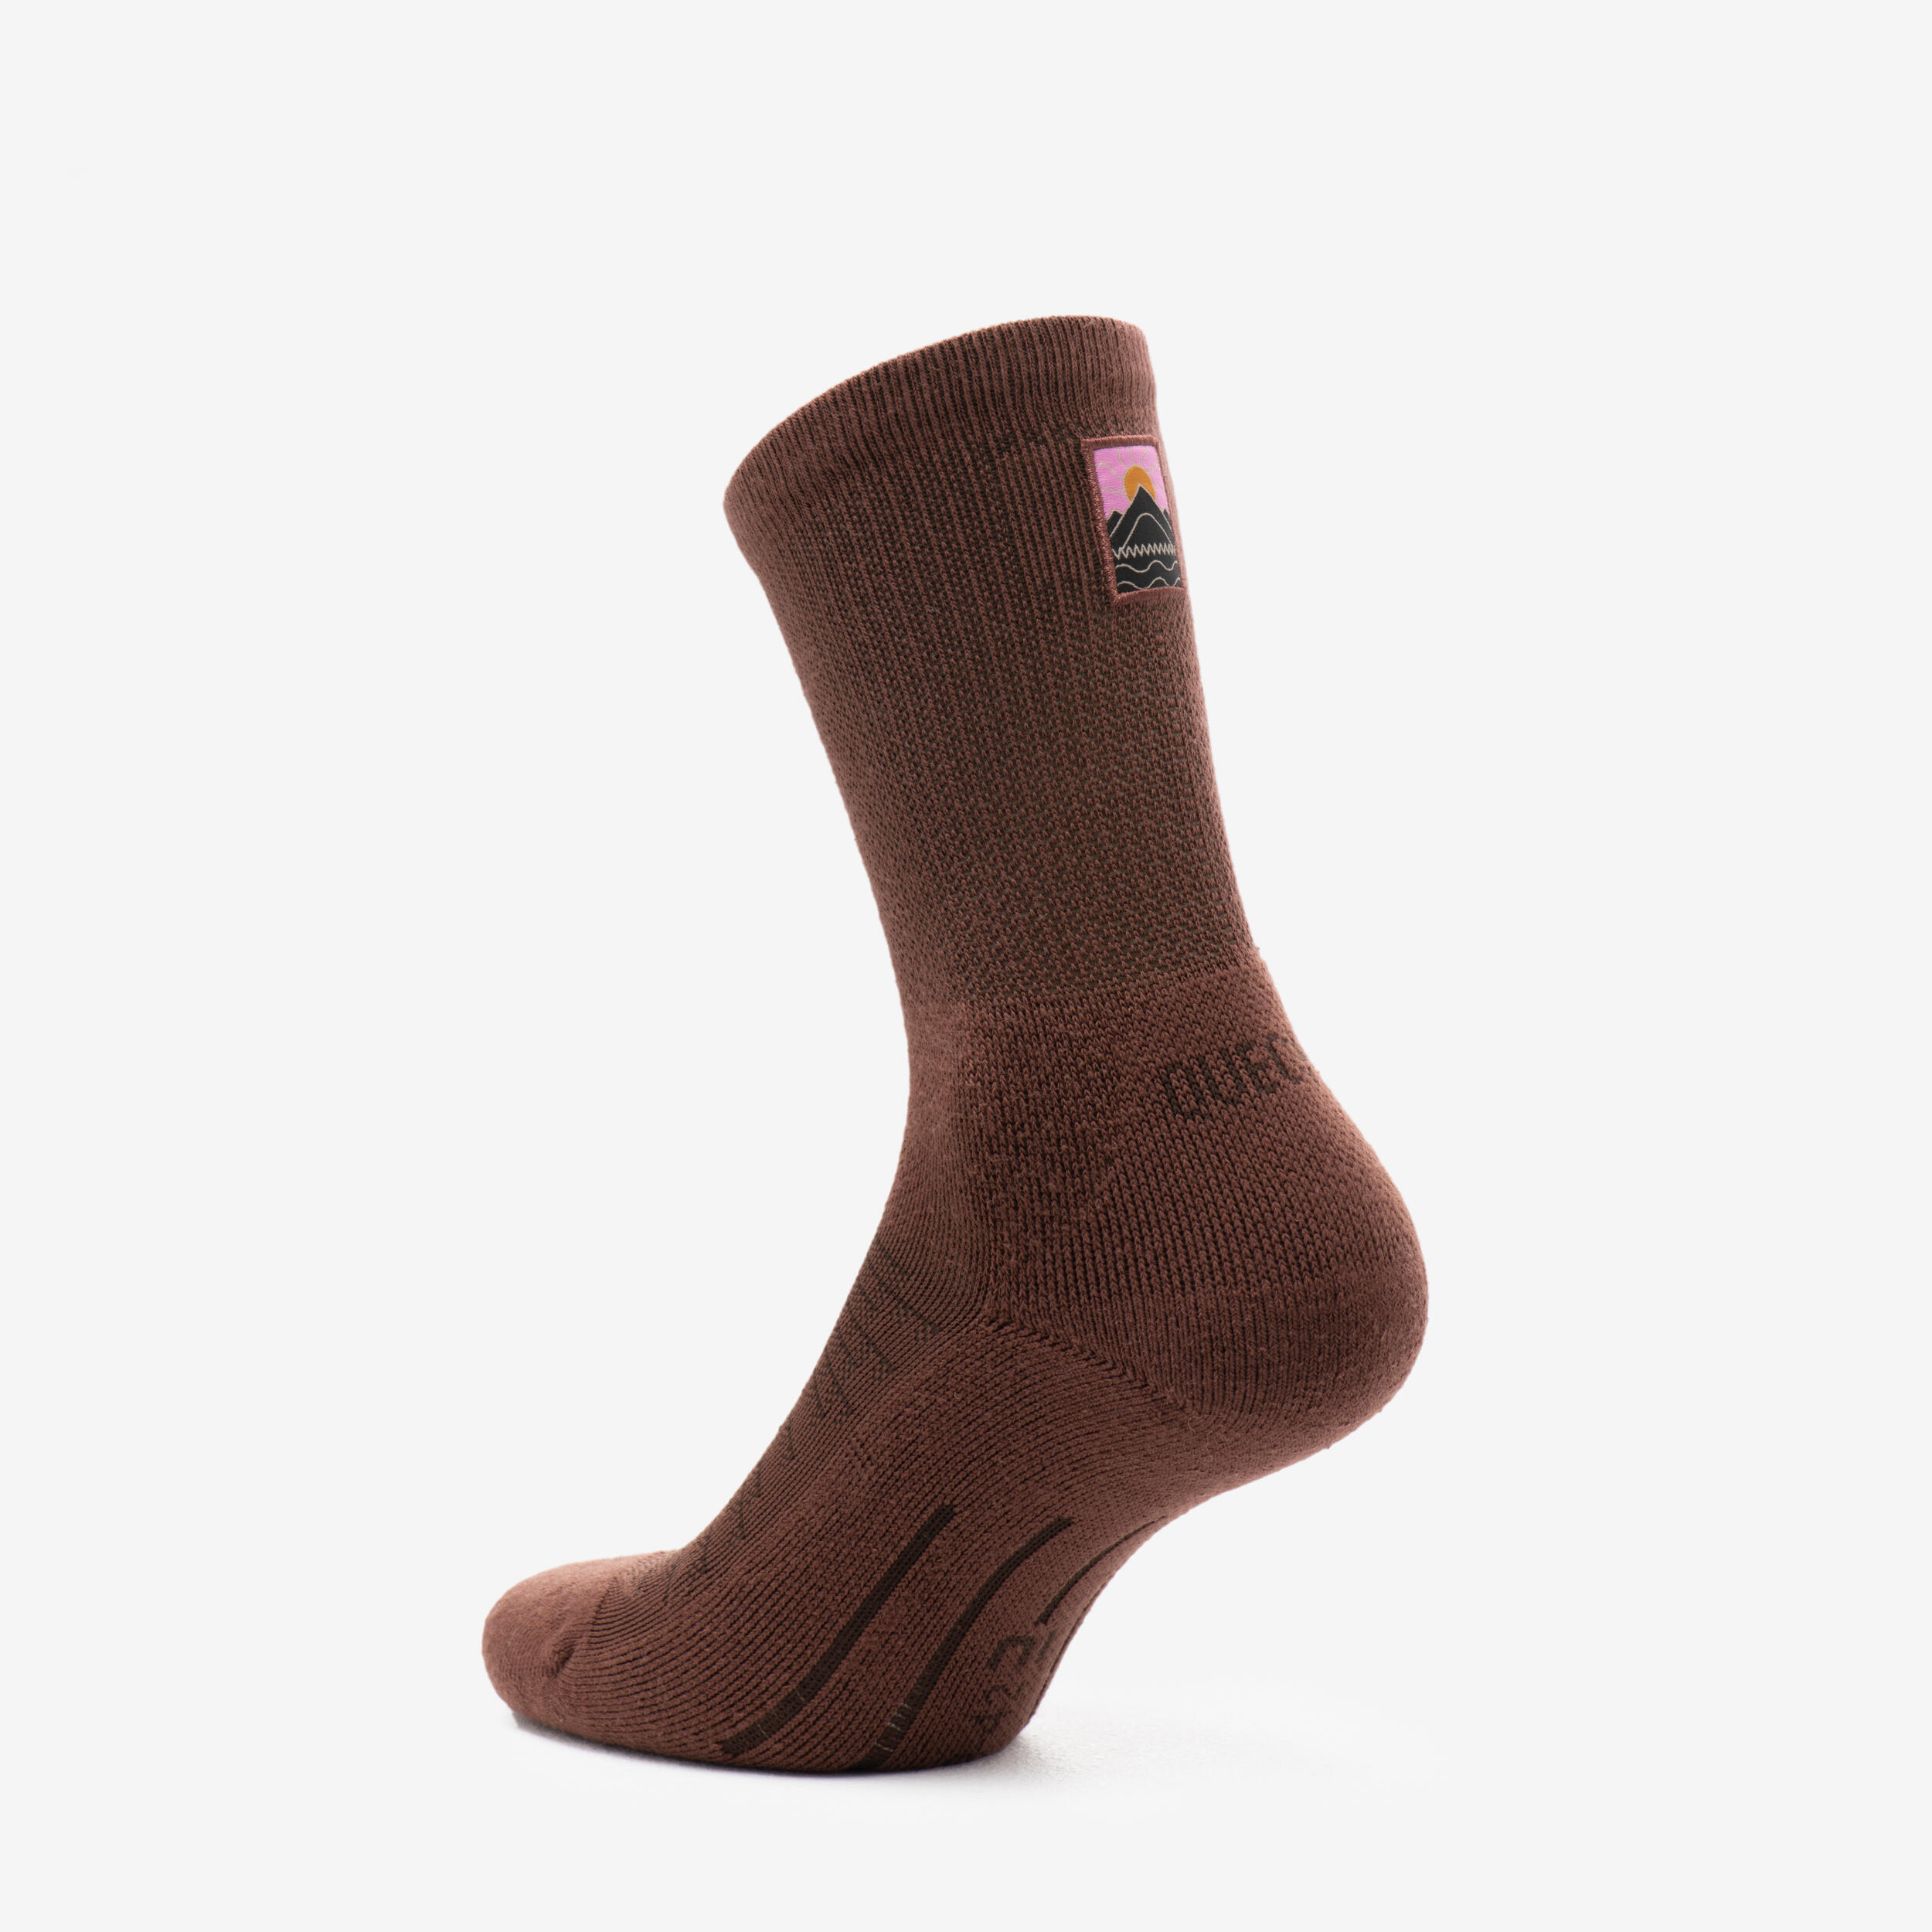 Hike 100 High Socks Limited Edition Pack of 2 Pairs - Khaki and Brown 10/11